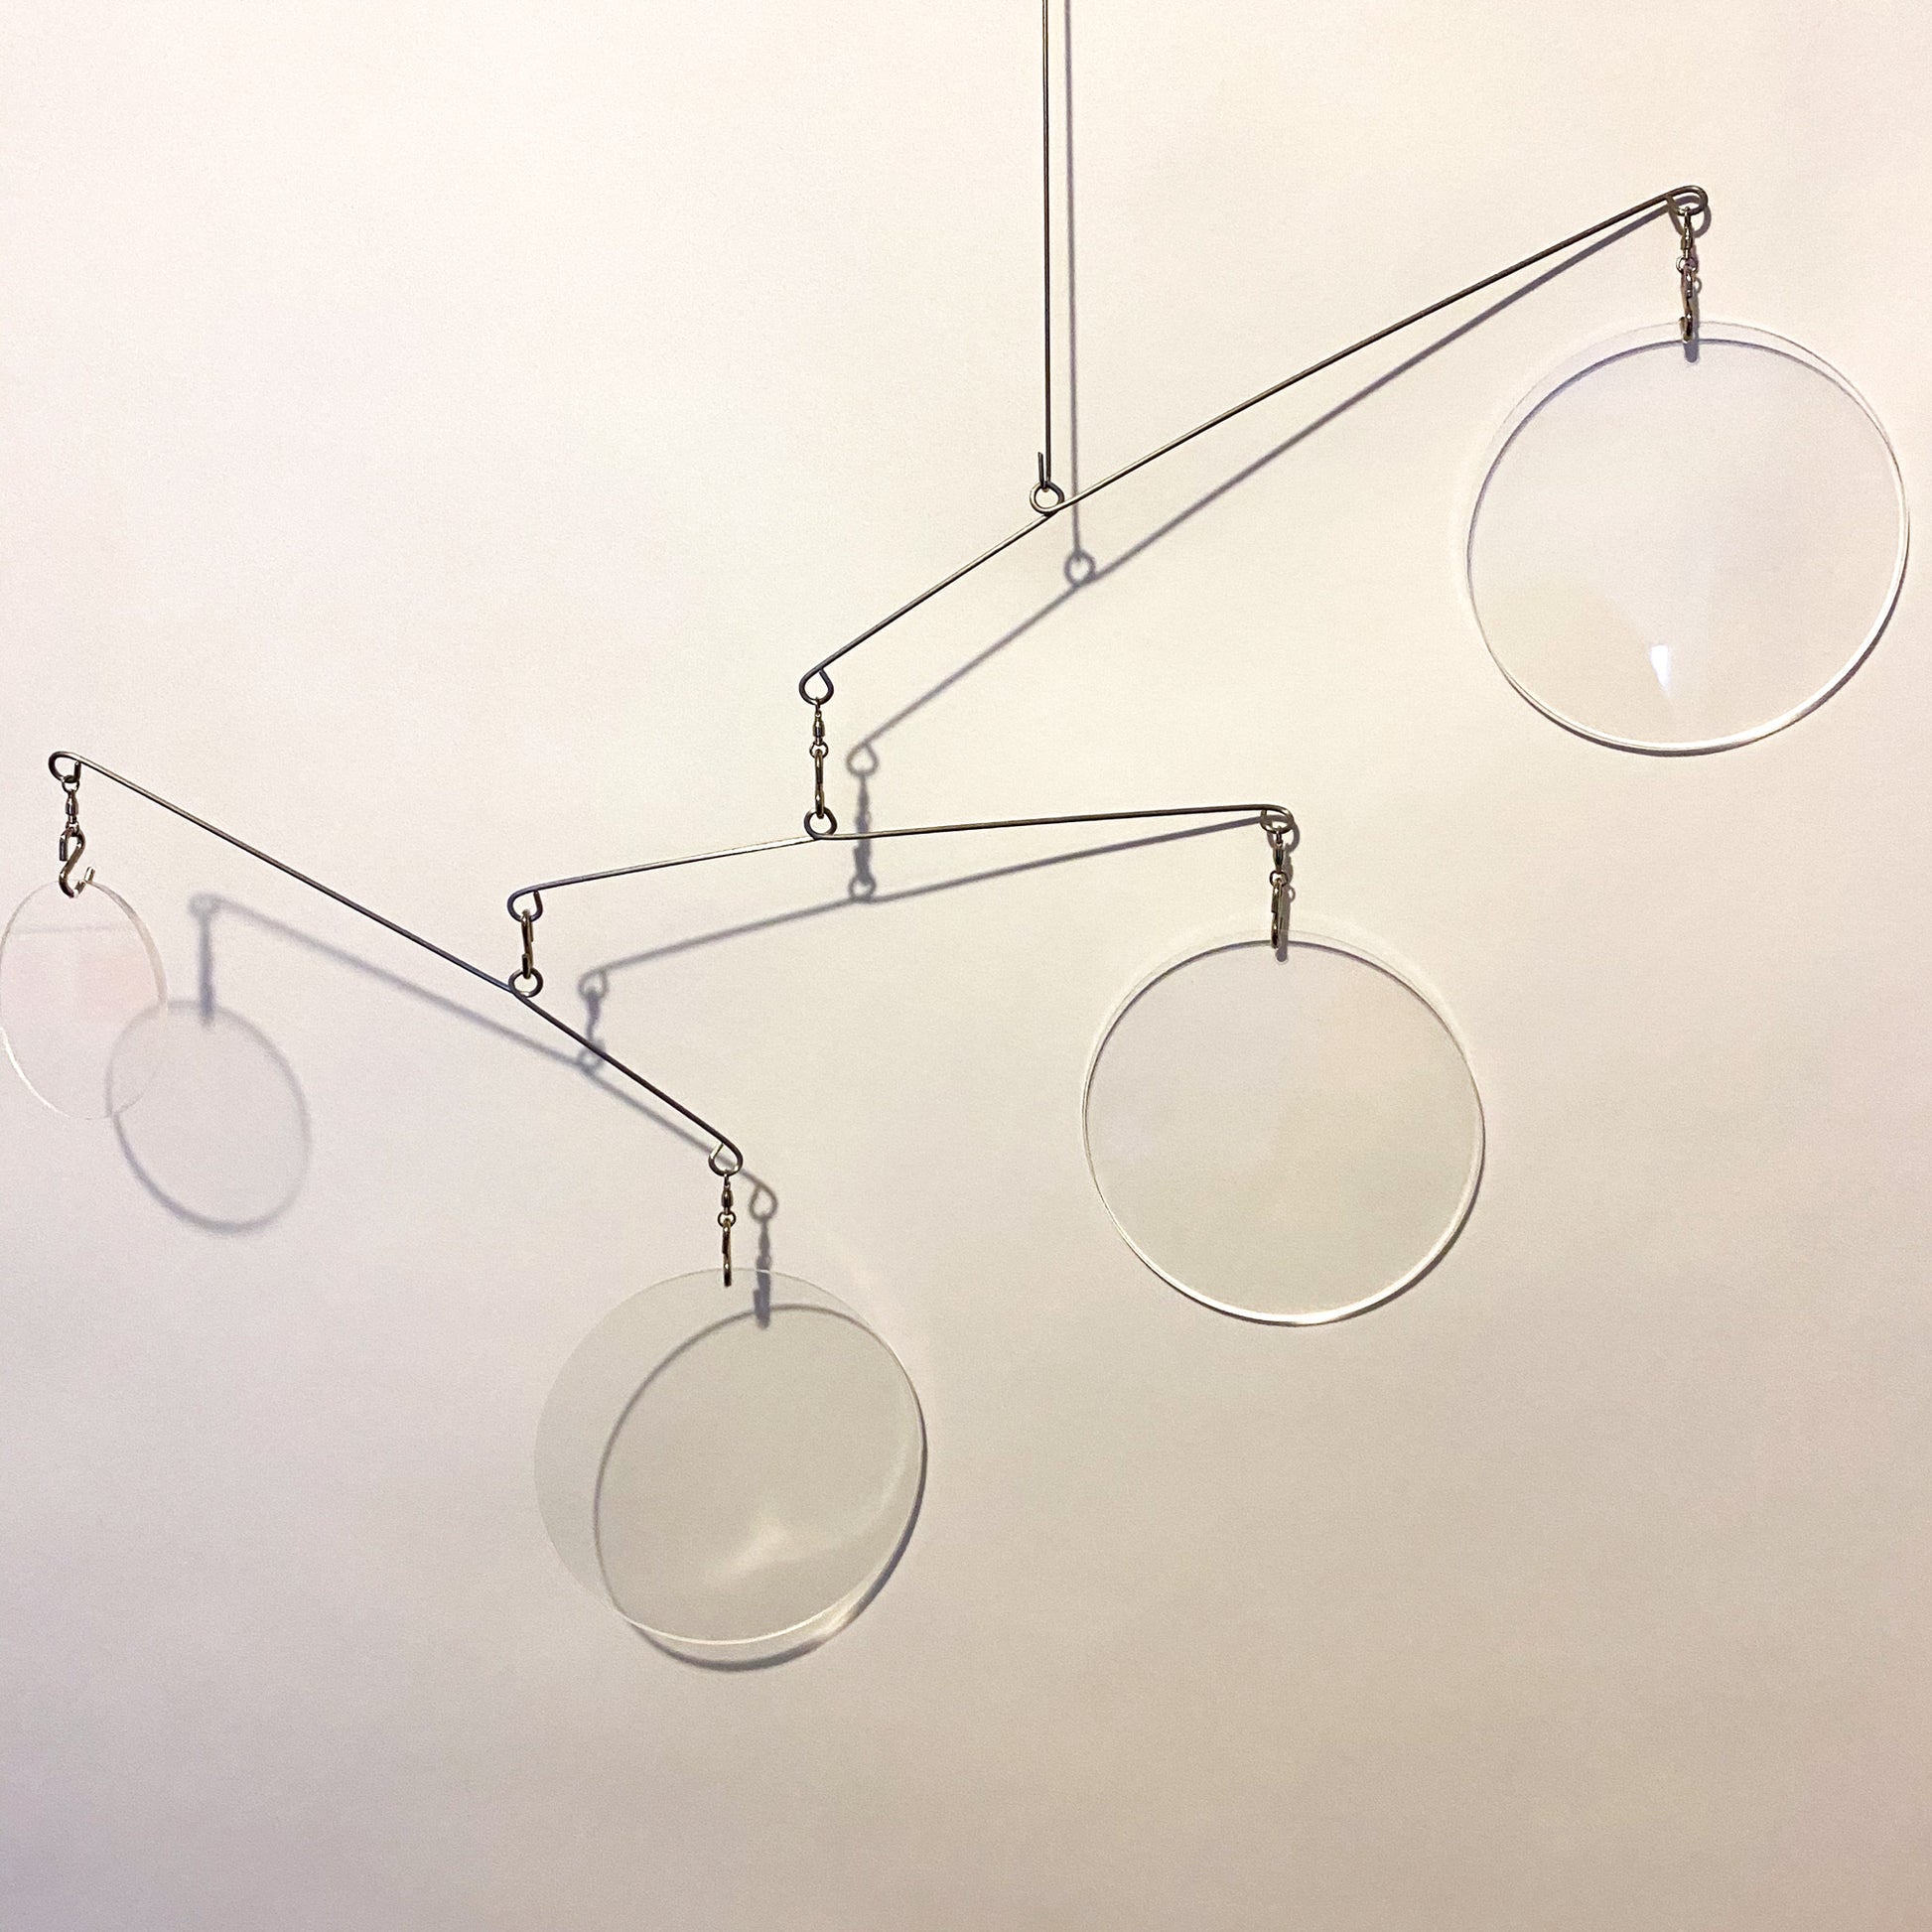 Clear Acrylic Atomic Mobile - kinetic hanging art mobiles for modern home decor by AtomicMobiles.com